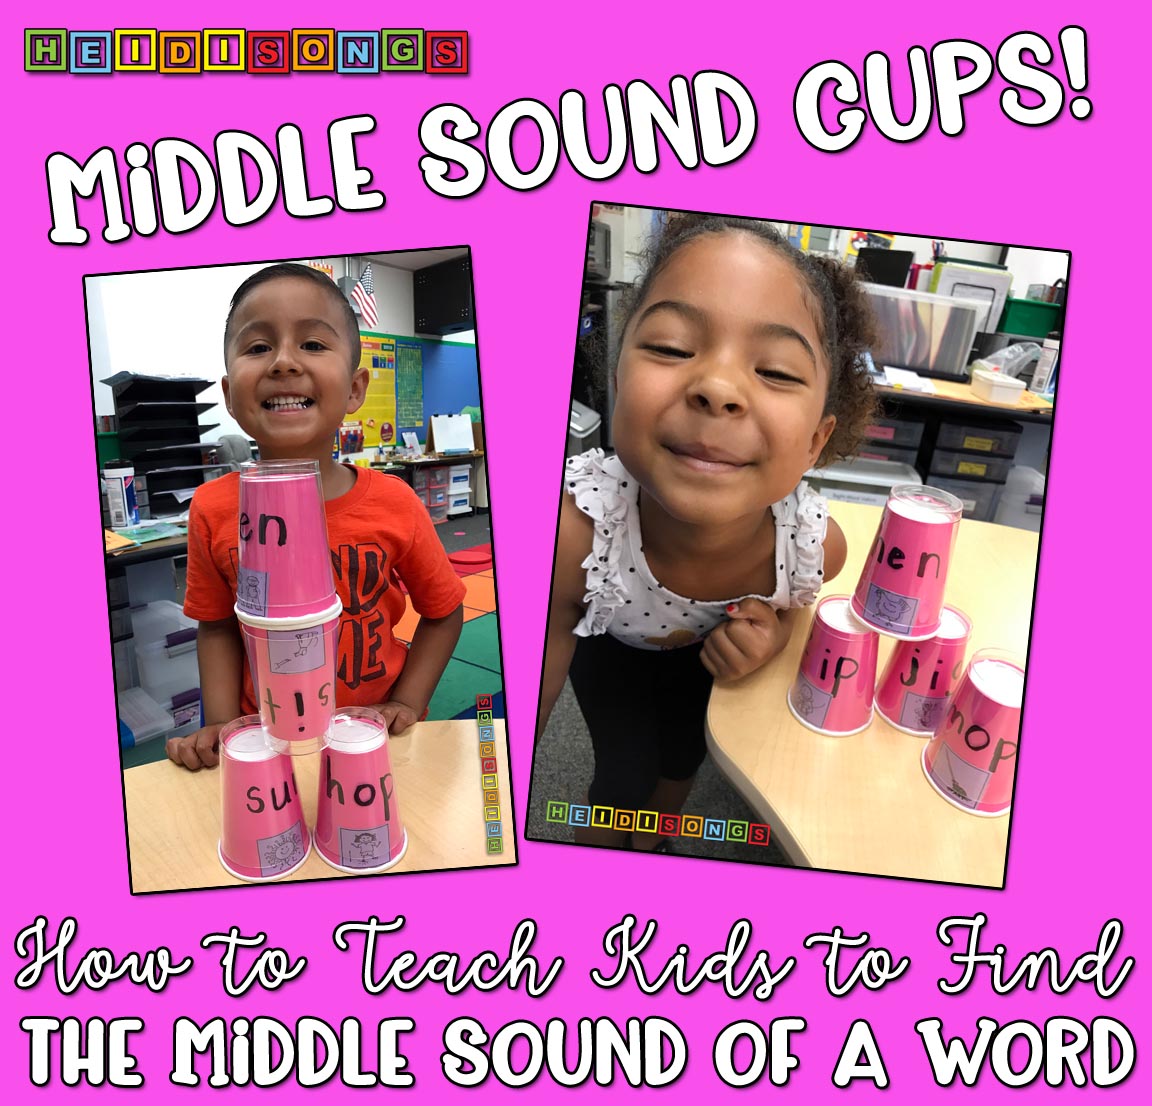 Middle Sound Cups! How to Teach Kids to Find the Middle Sound of a Word